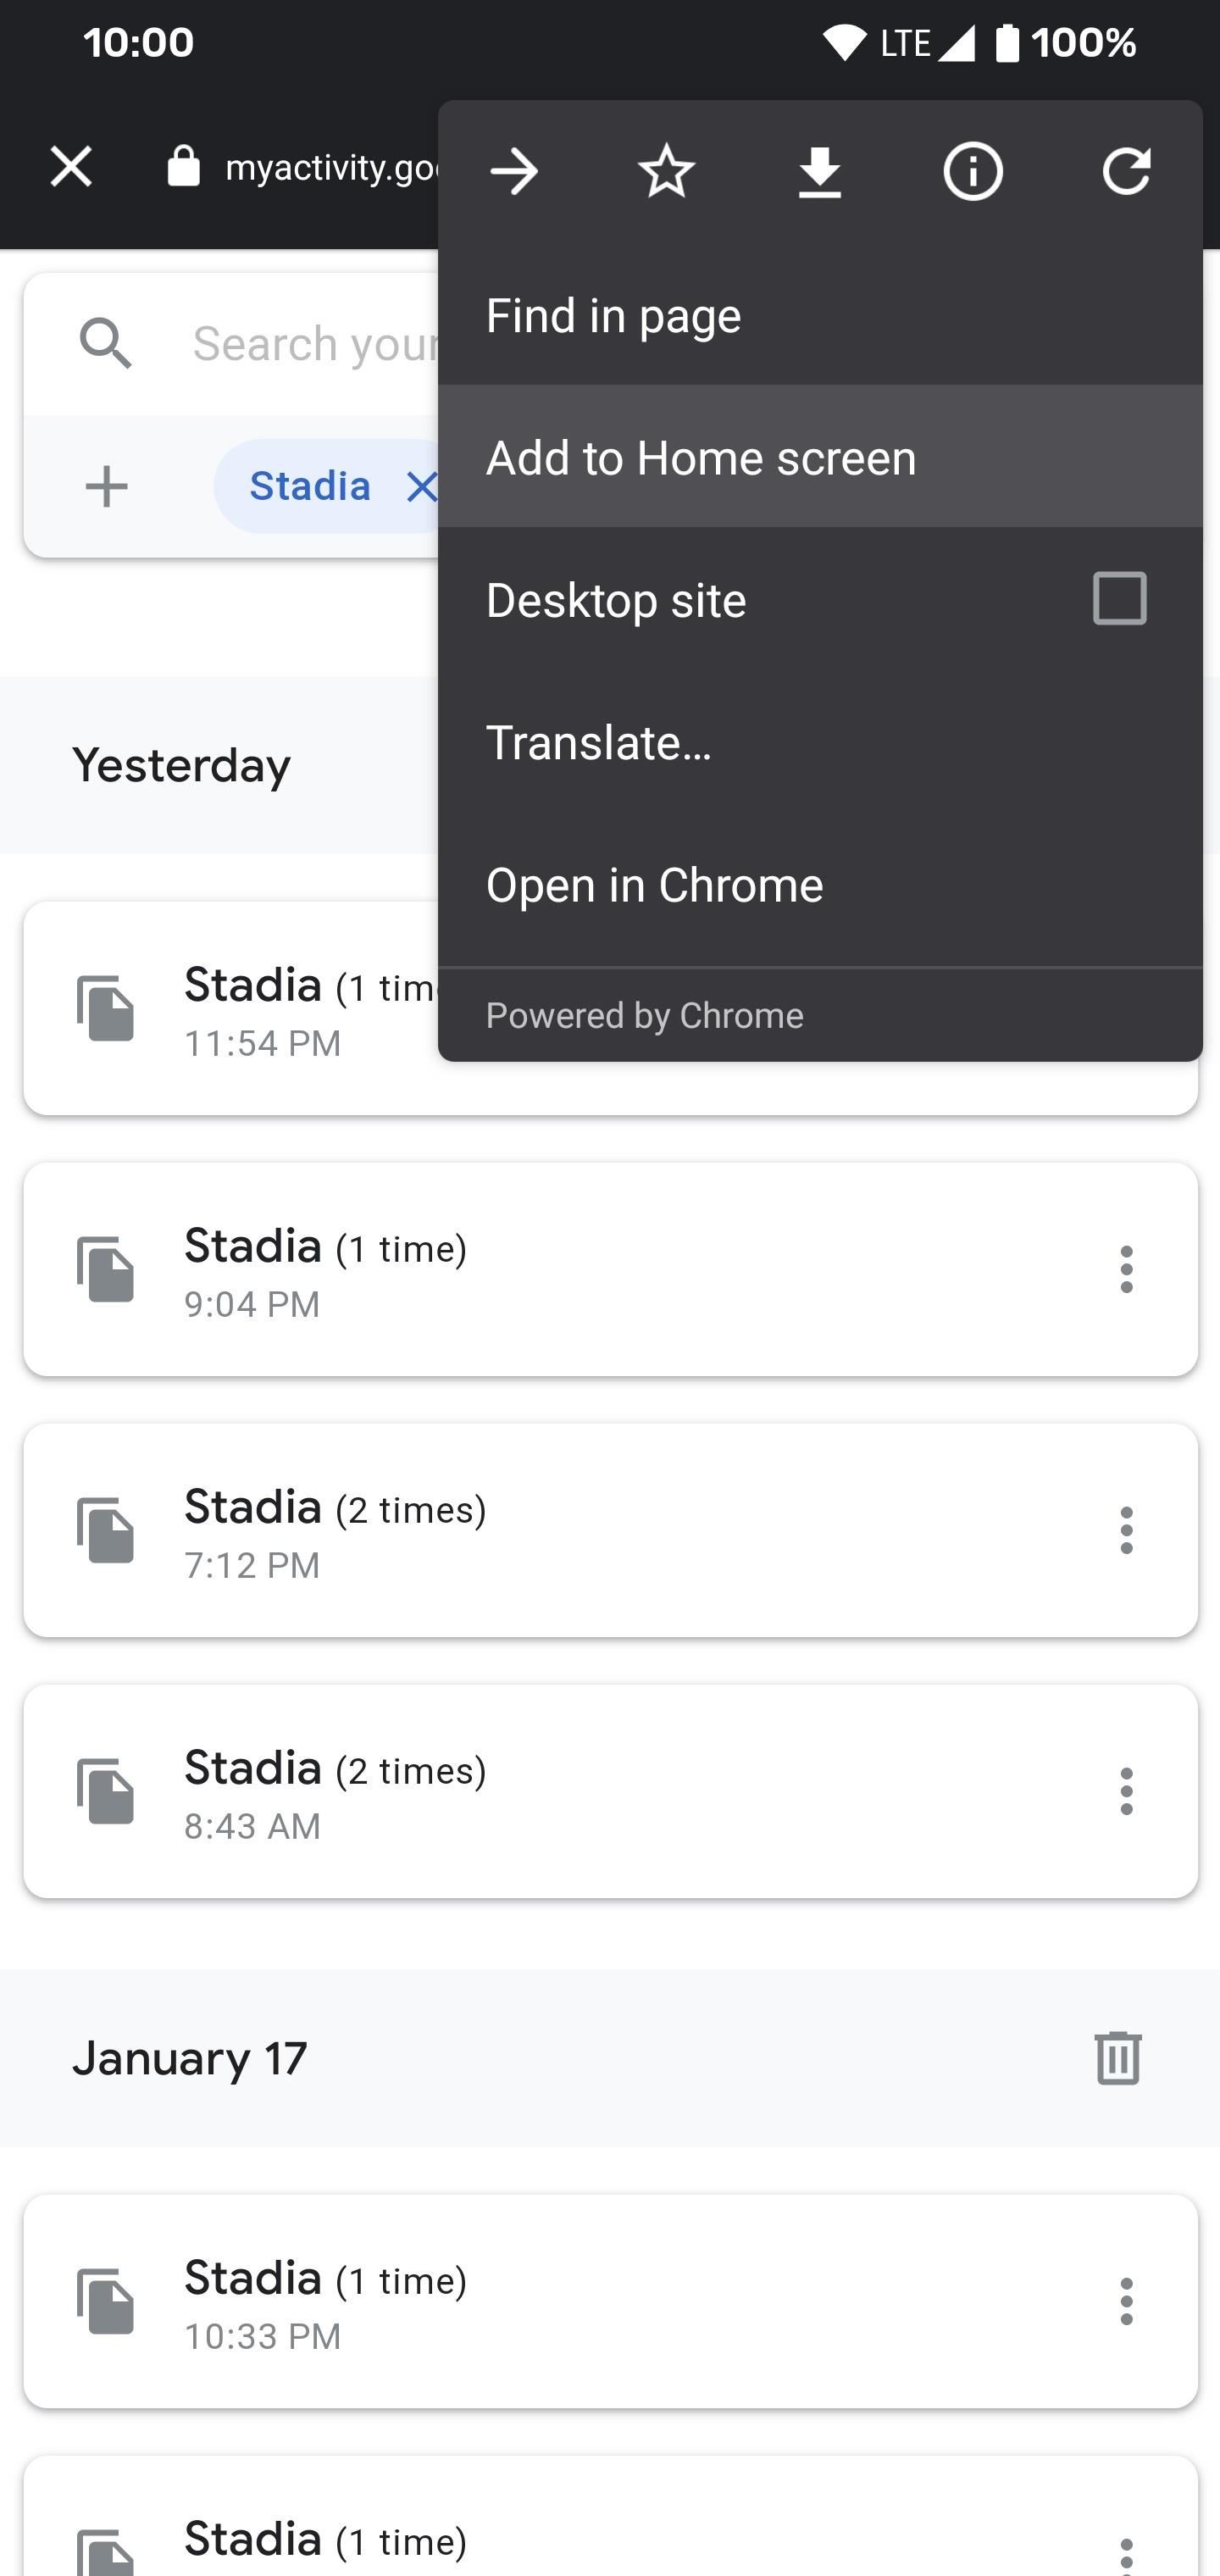 How to View Your Stadia Gaming Sessions from Your Google Account History